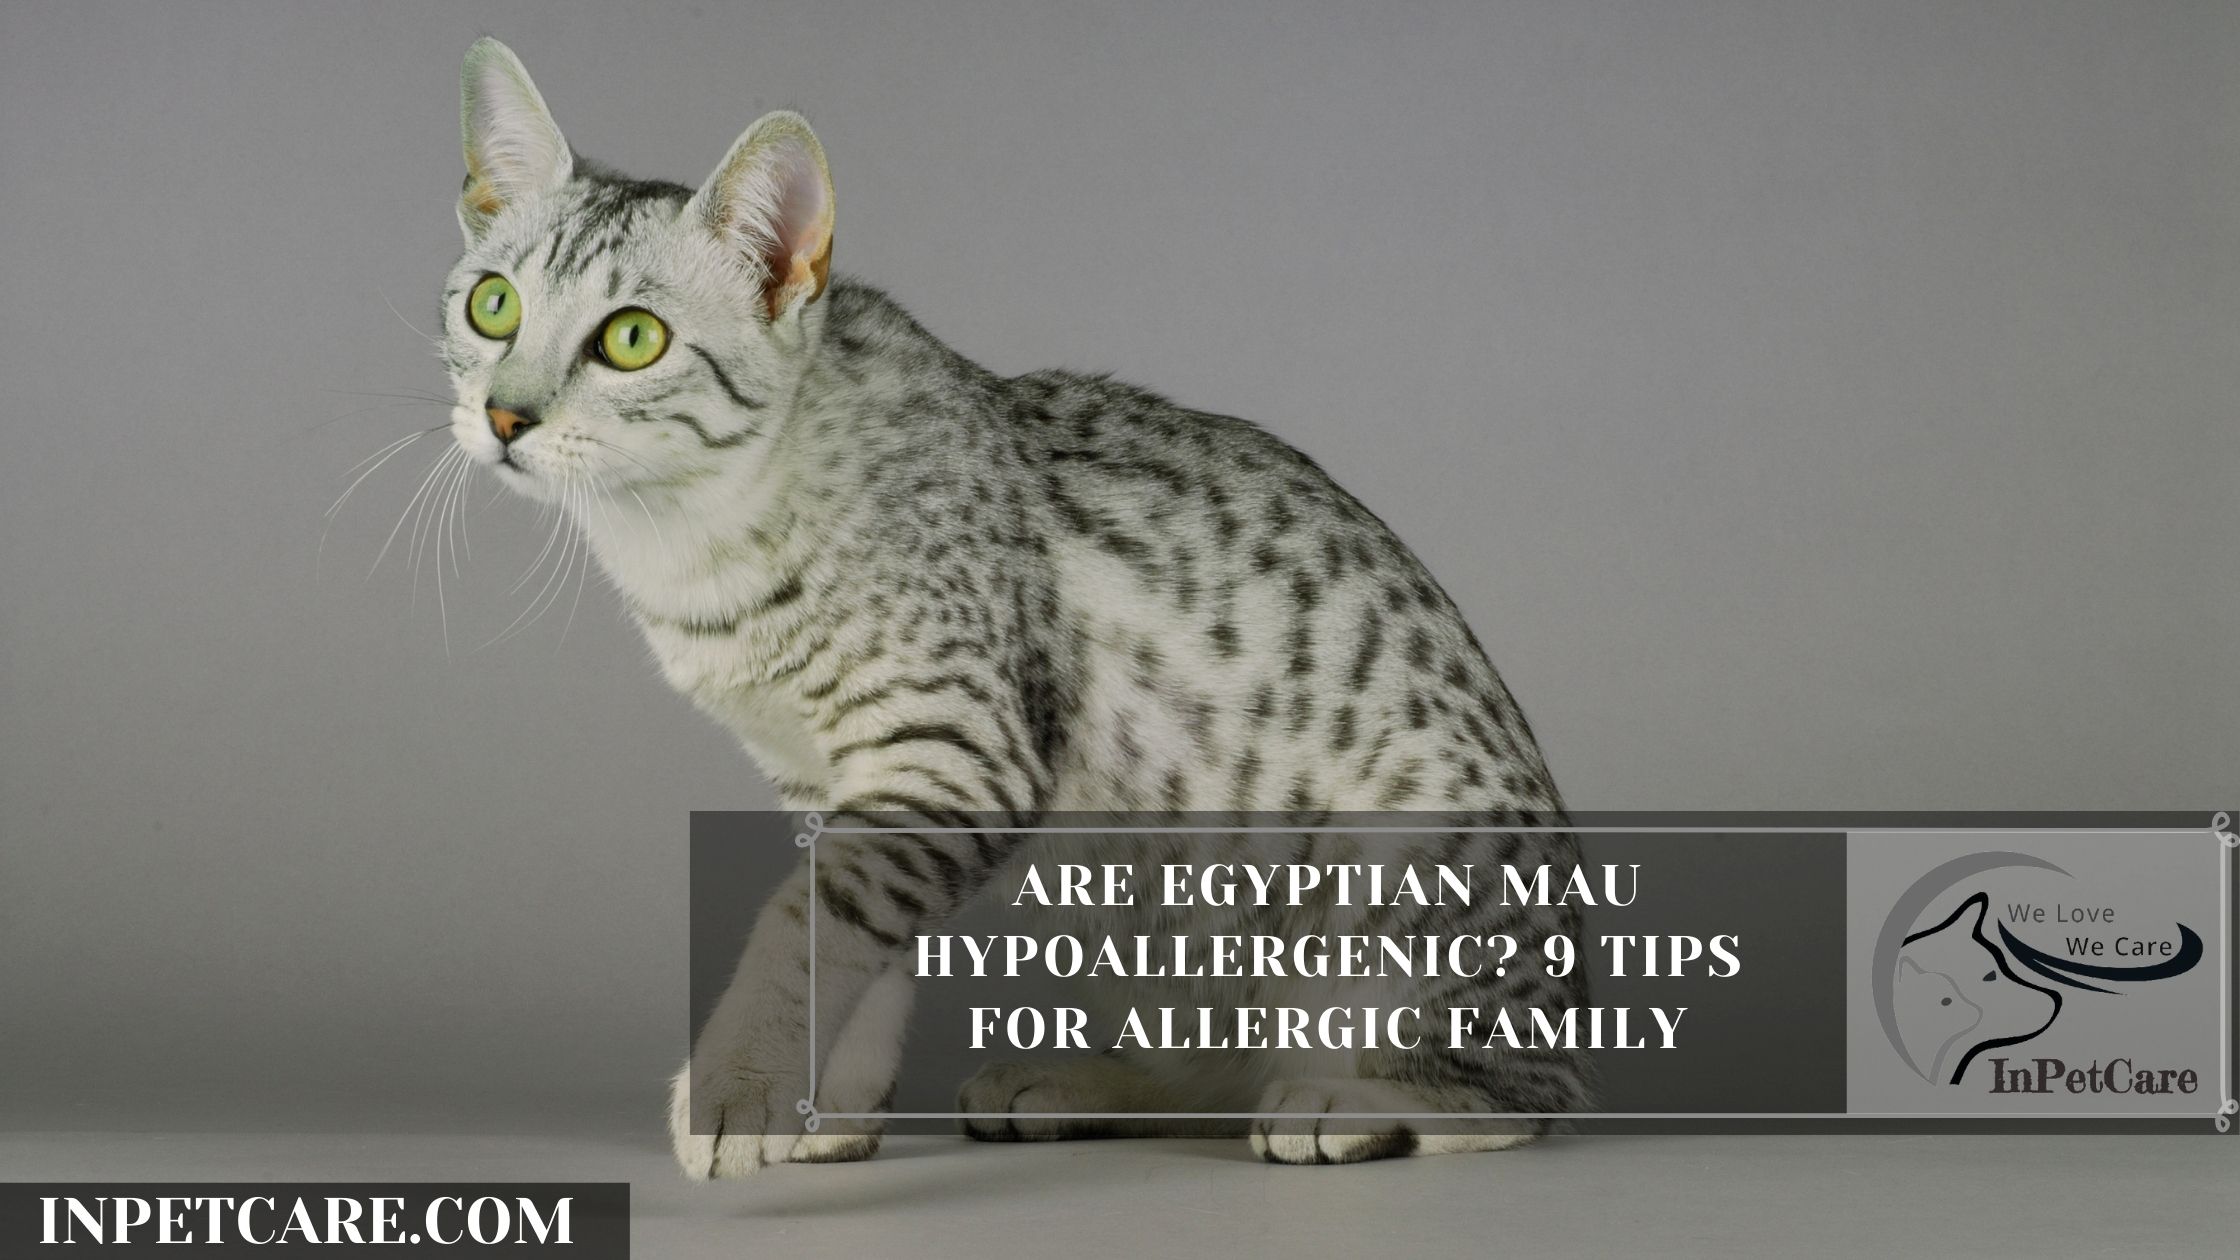 Are Egyptian Mau Hypoallergenic? 9 Tips For Allergic Family